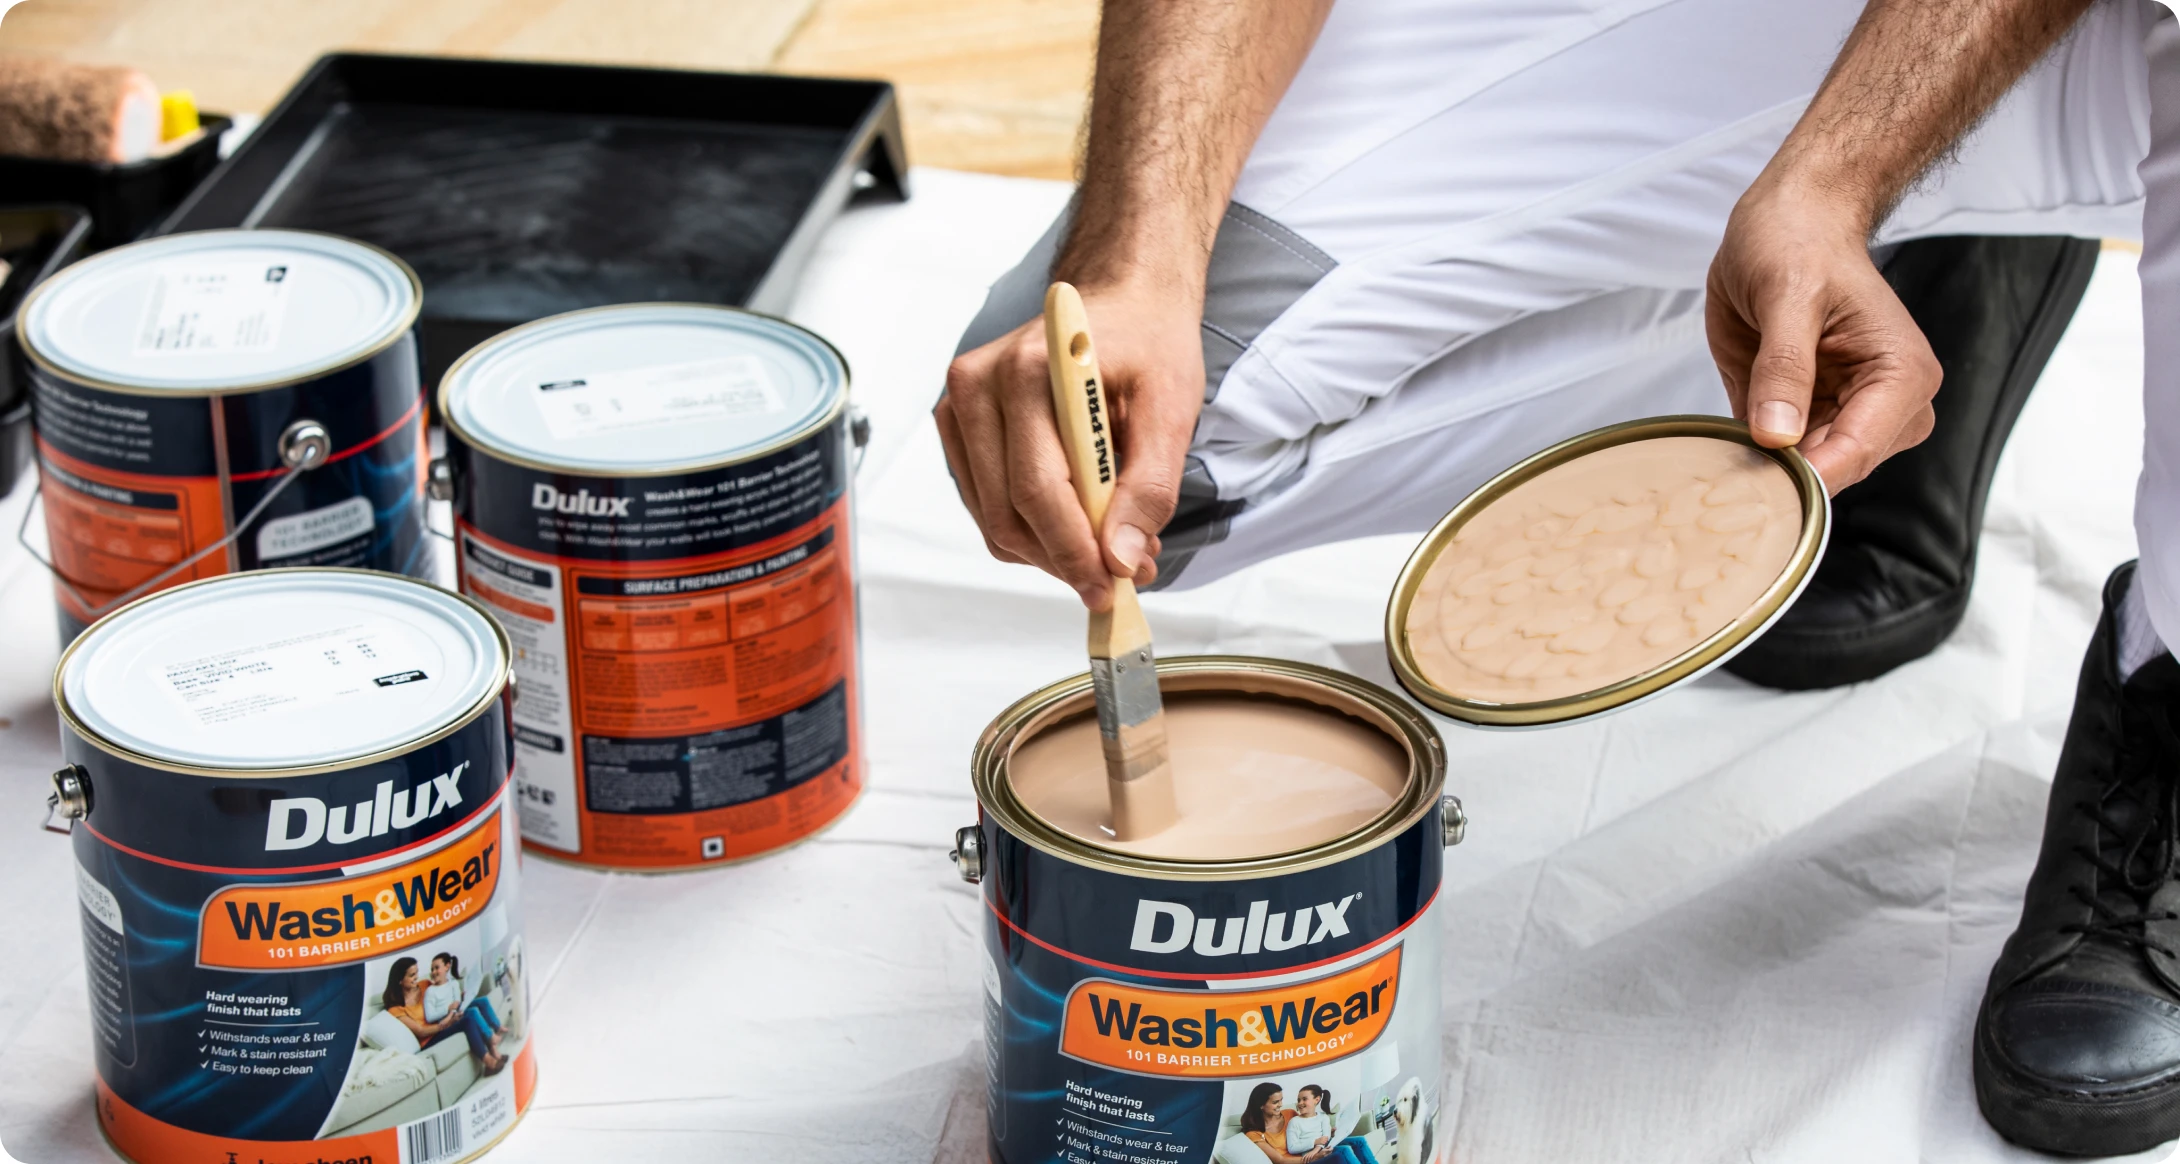 Dulux wash and wear paint can on white sheet